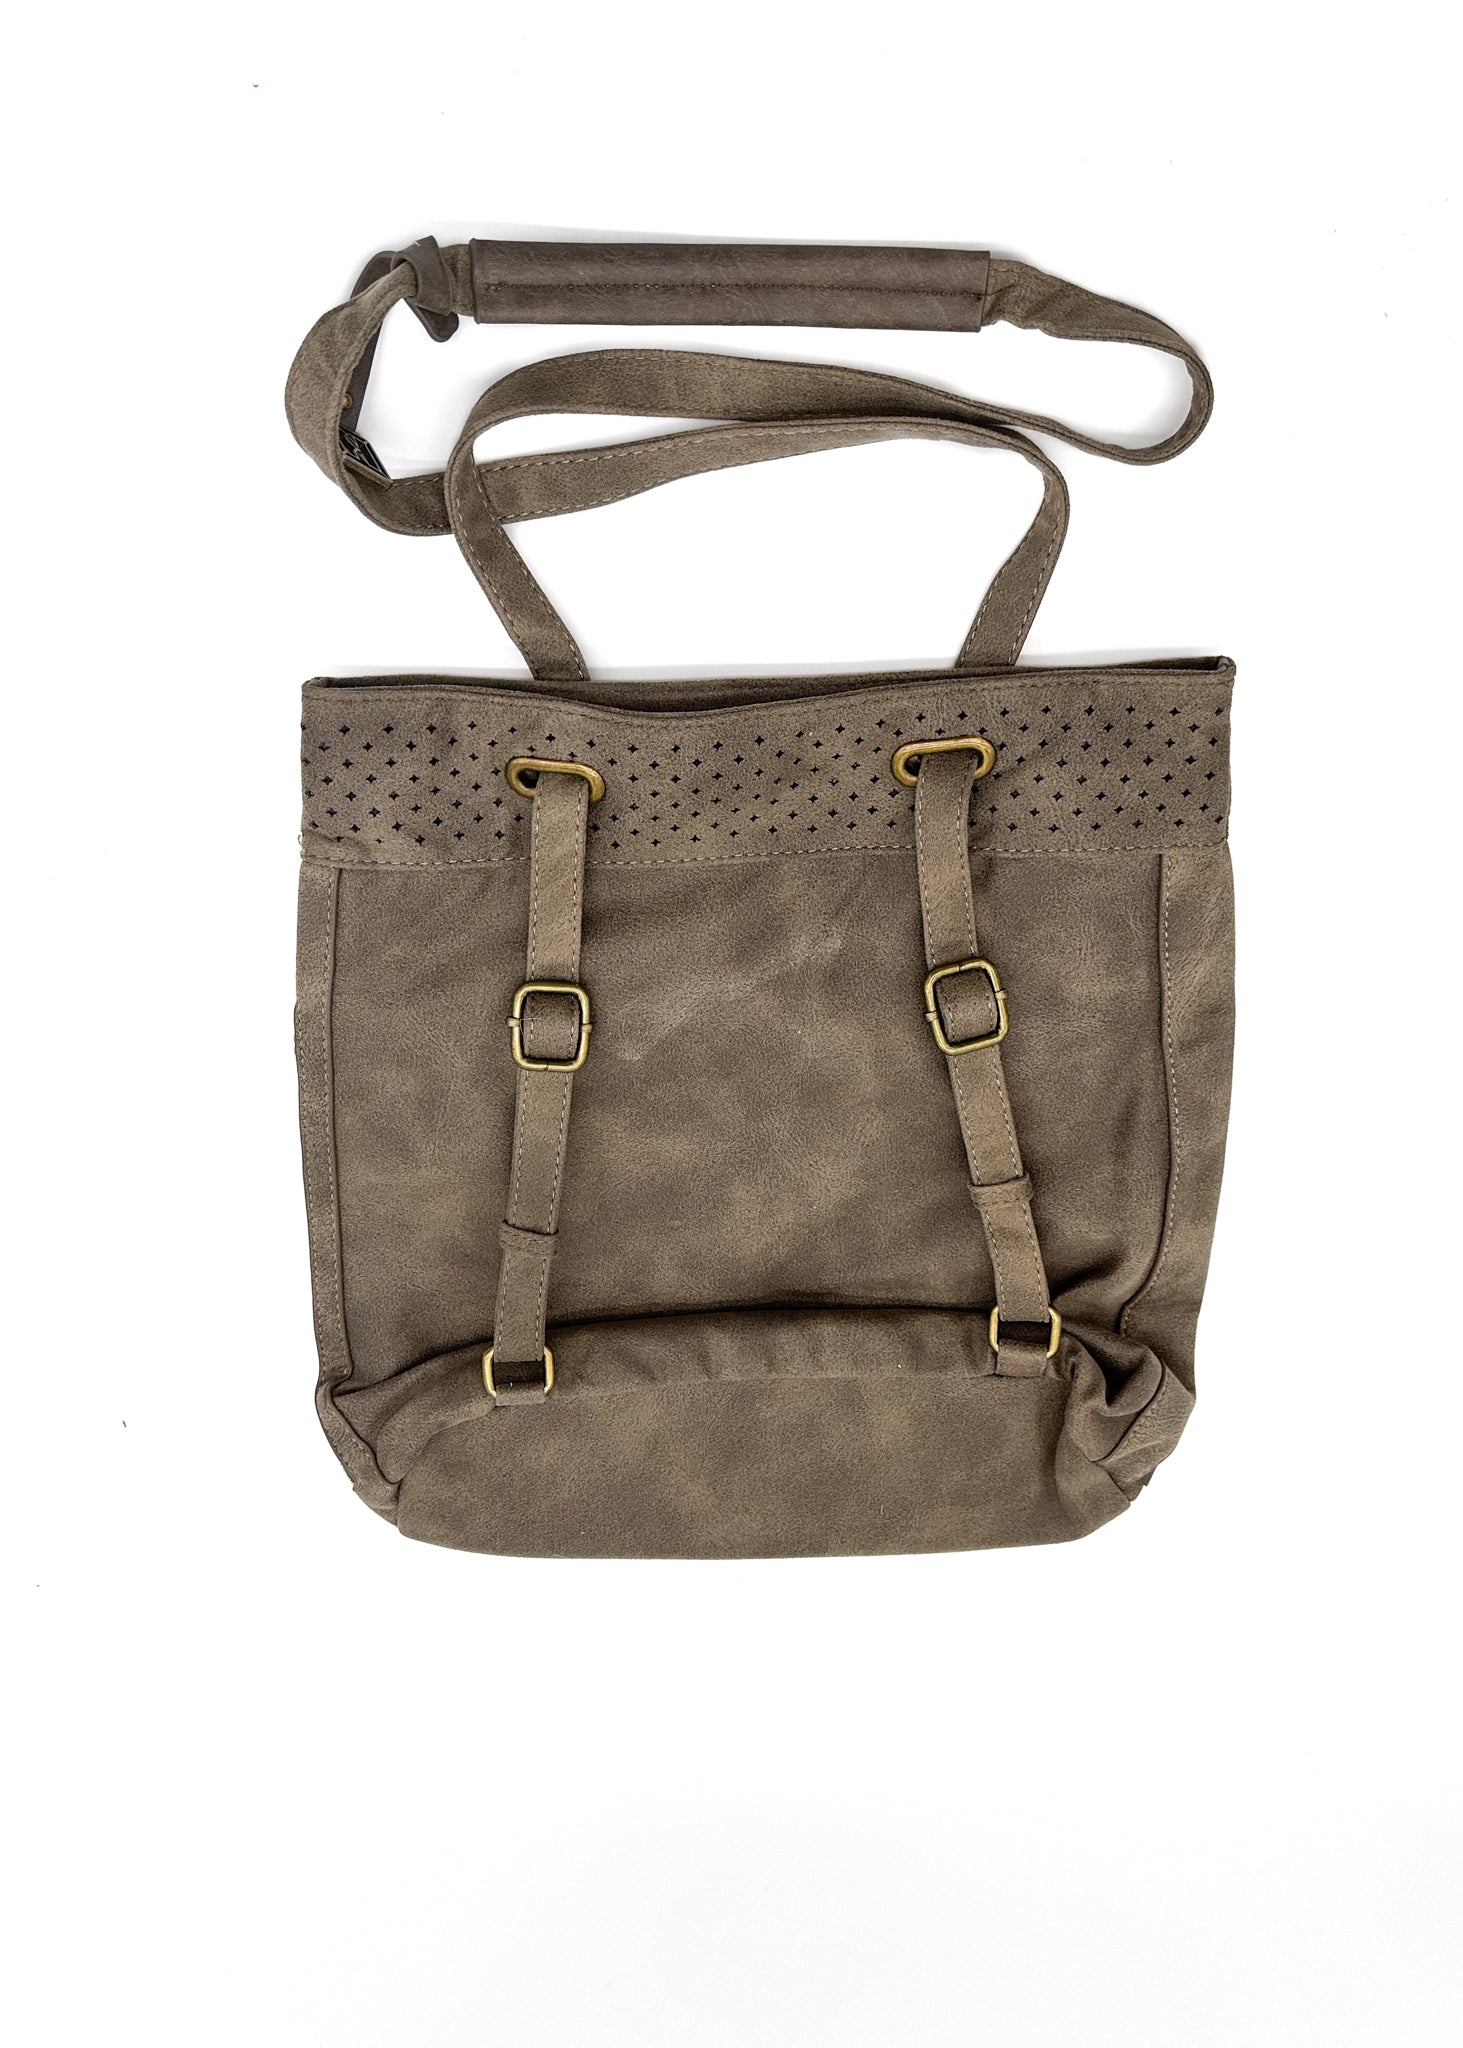 Giggy Backpack in Taupe